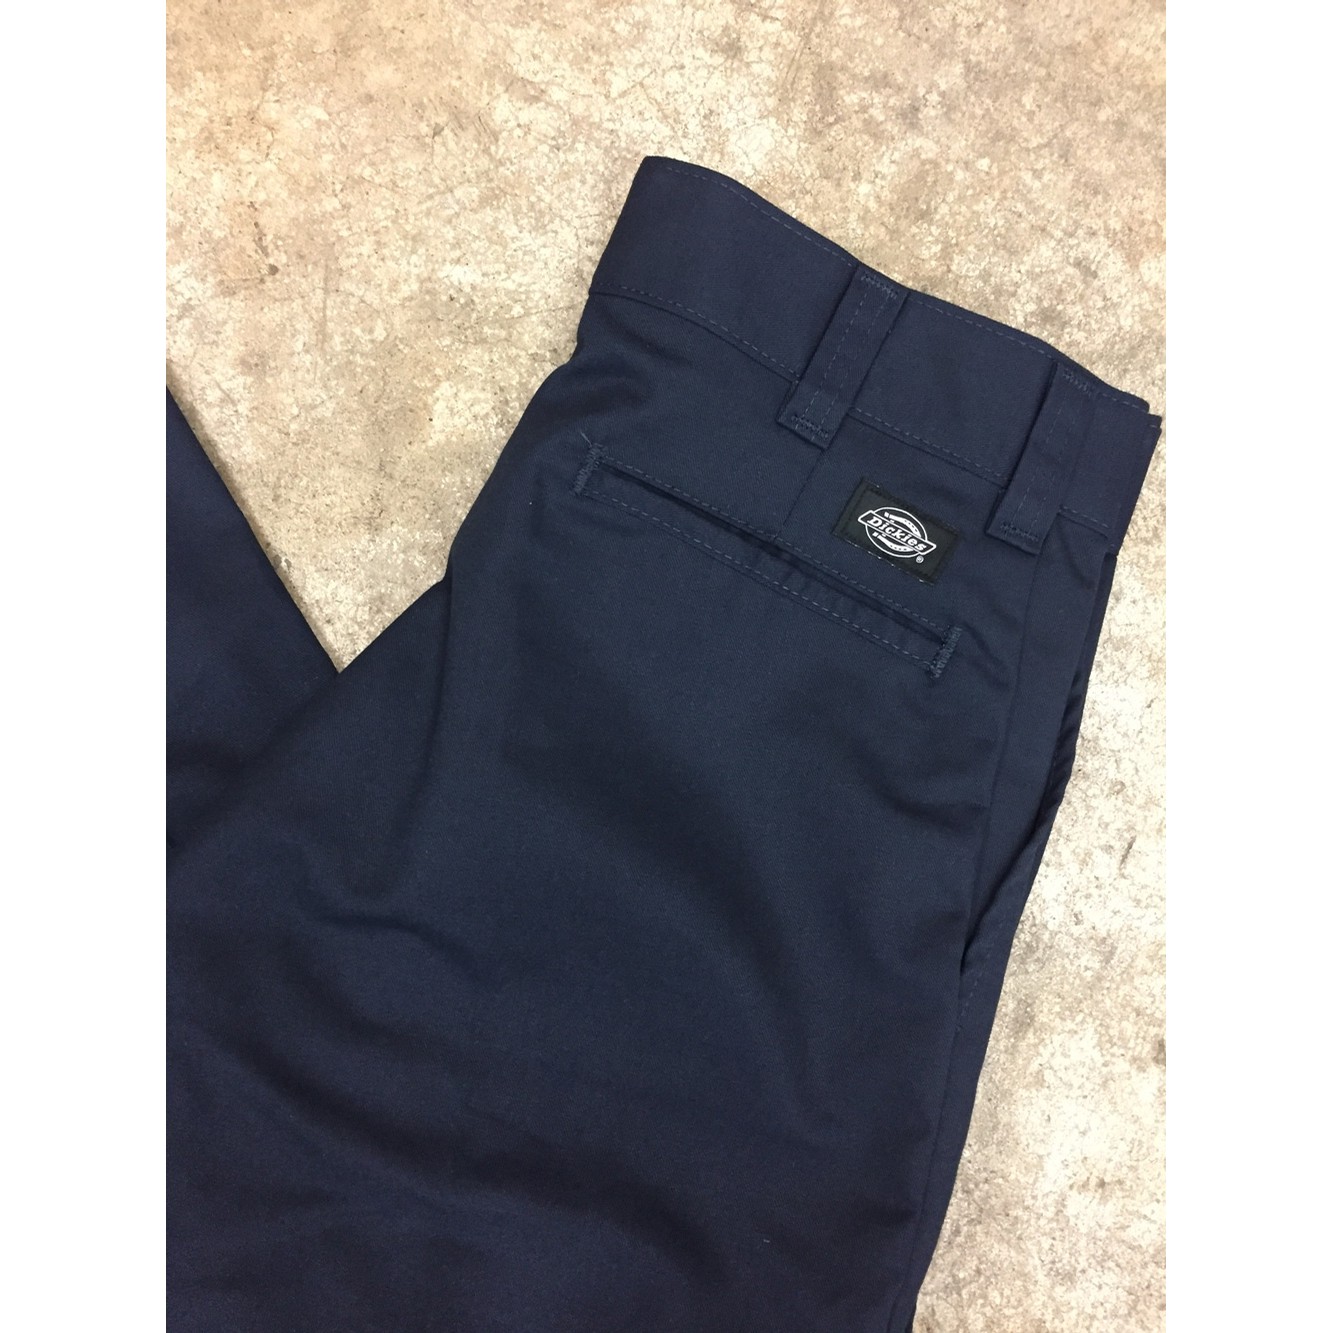 Dickies 67 Collection Slim Straight Work Pant (dn) Pants at Cal Surf